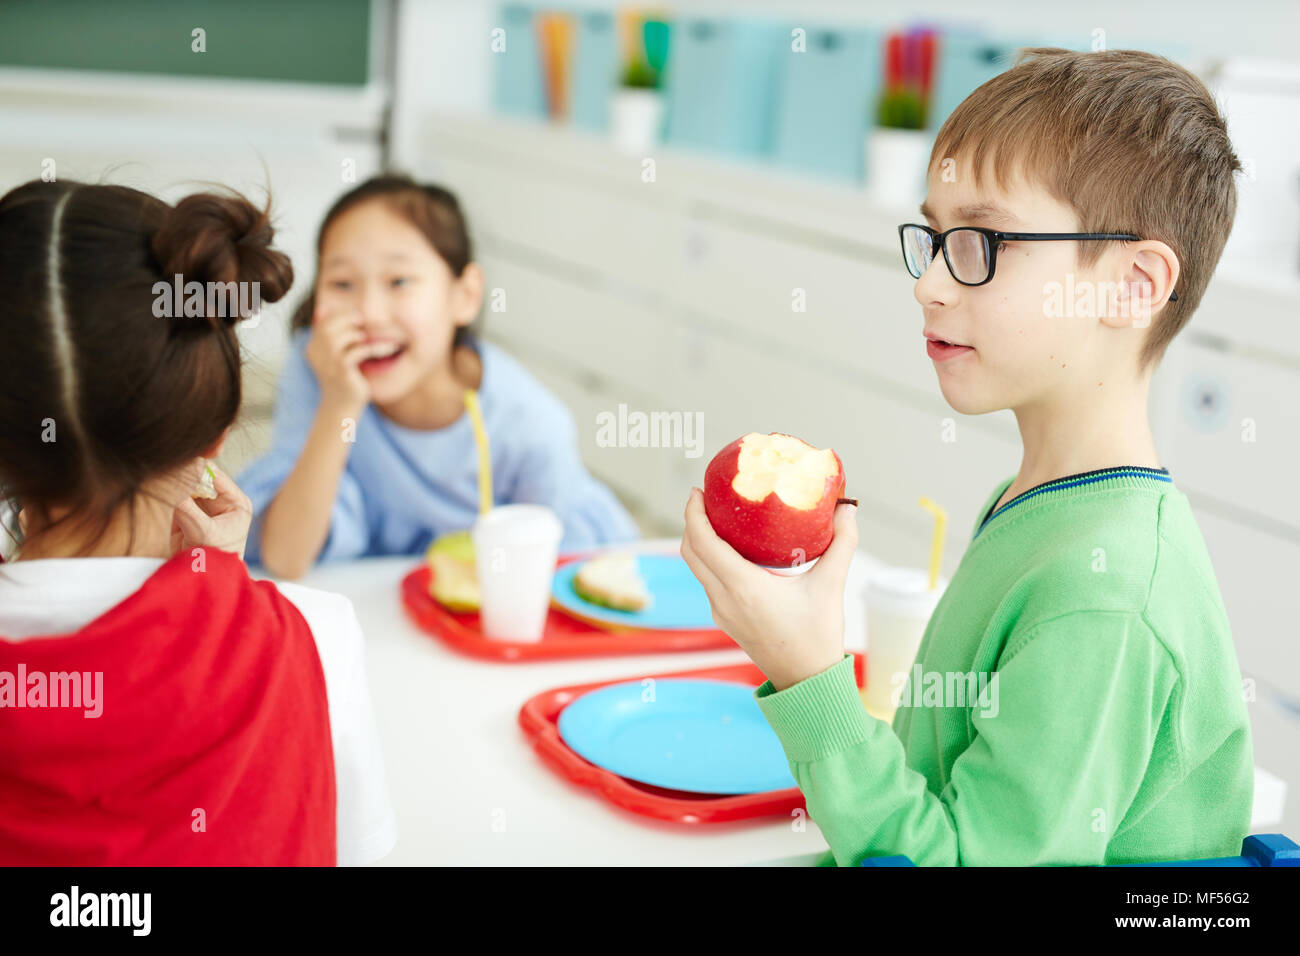 https://c8.alamy.com/comp/MF56G2/caucasian-boy-in-glasses-eating-apple-while-having-lunch-with-classmates-in-elementary-school-cafeteria-MF56G2.jpg